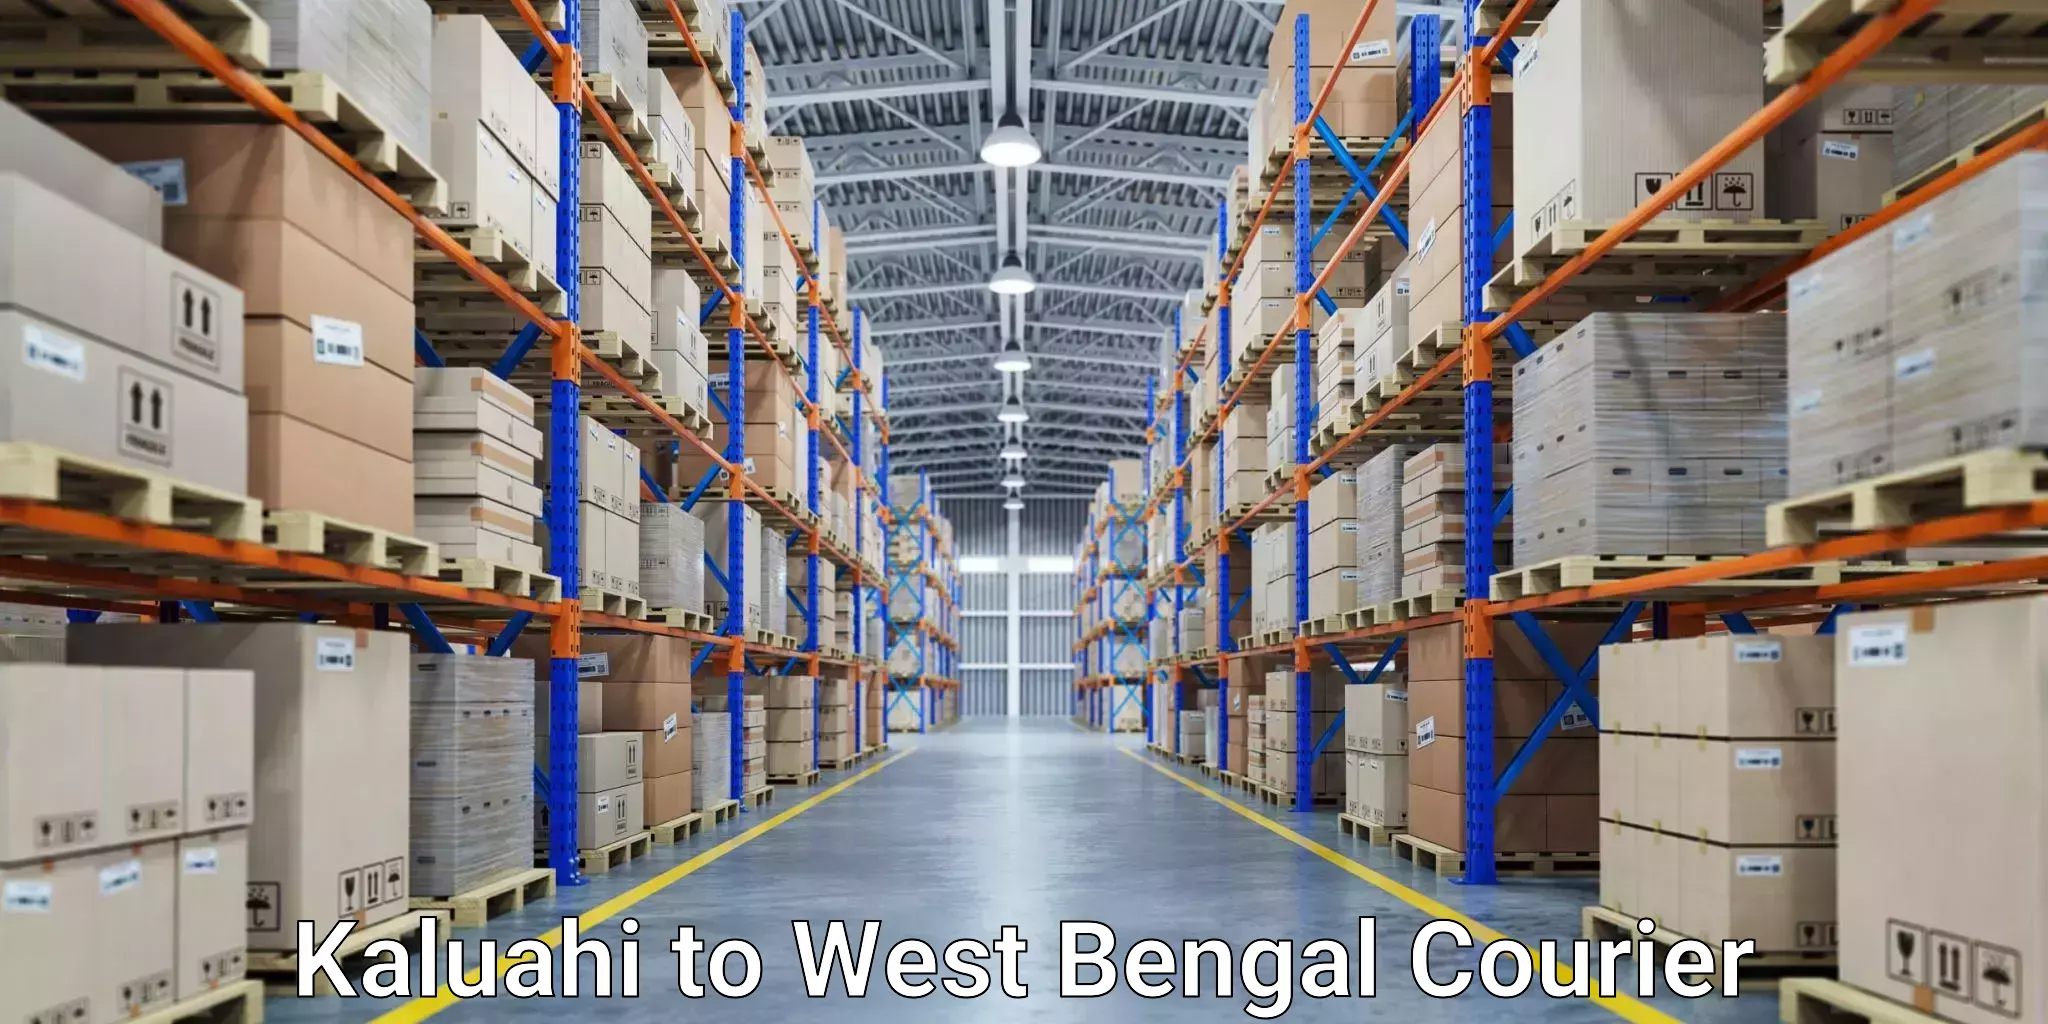 Tech-enabled shipping Kaluahi to West Bengal